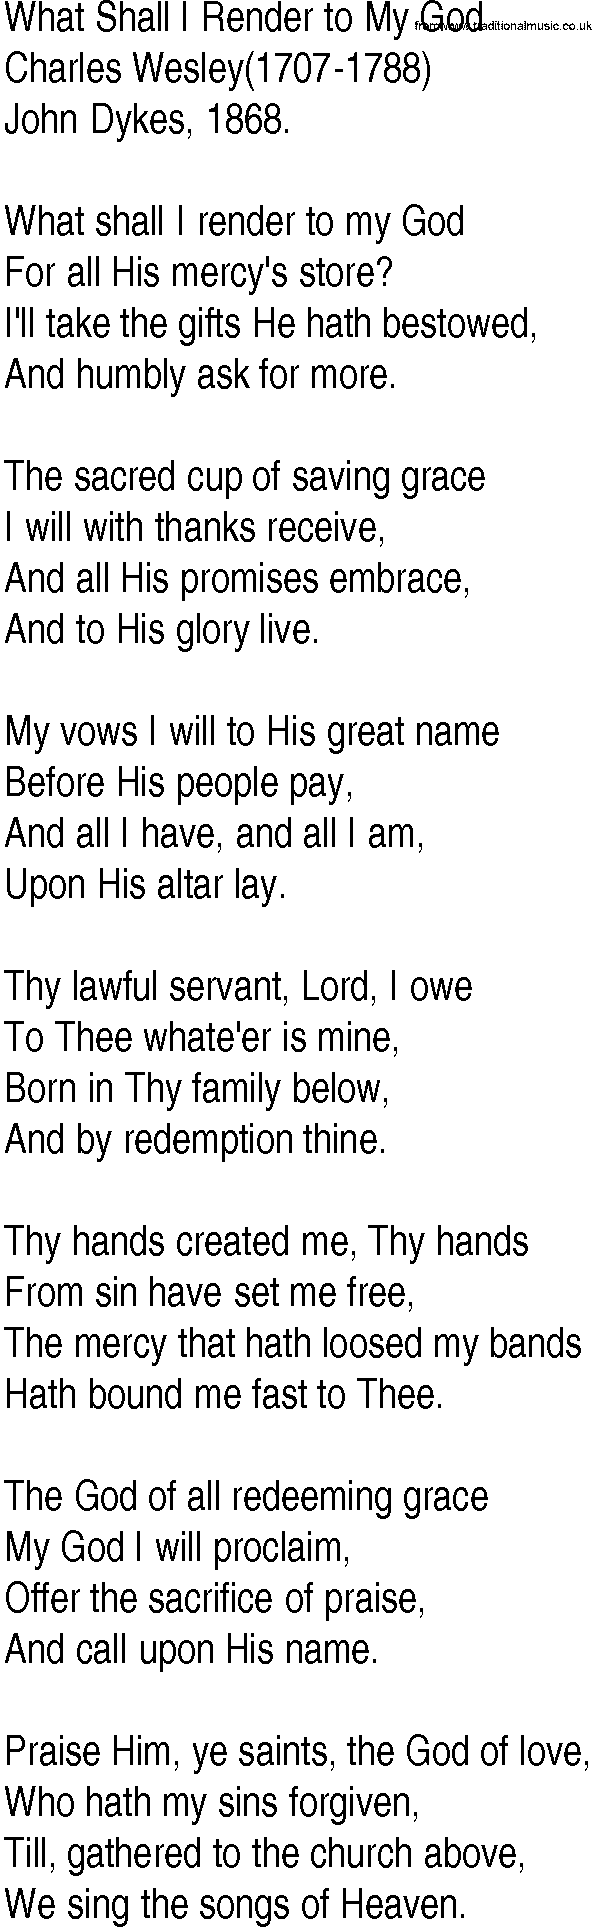 Hymn and Gospel Song: What Shall I Render to My God by Charles Wesley lyrics